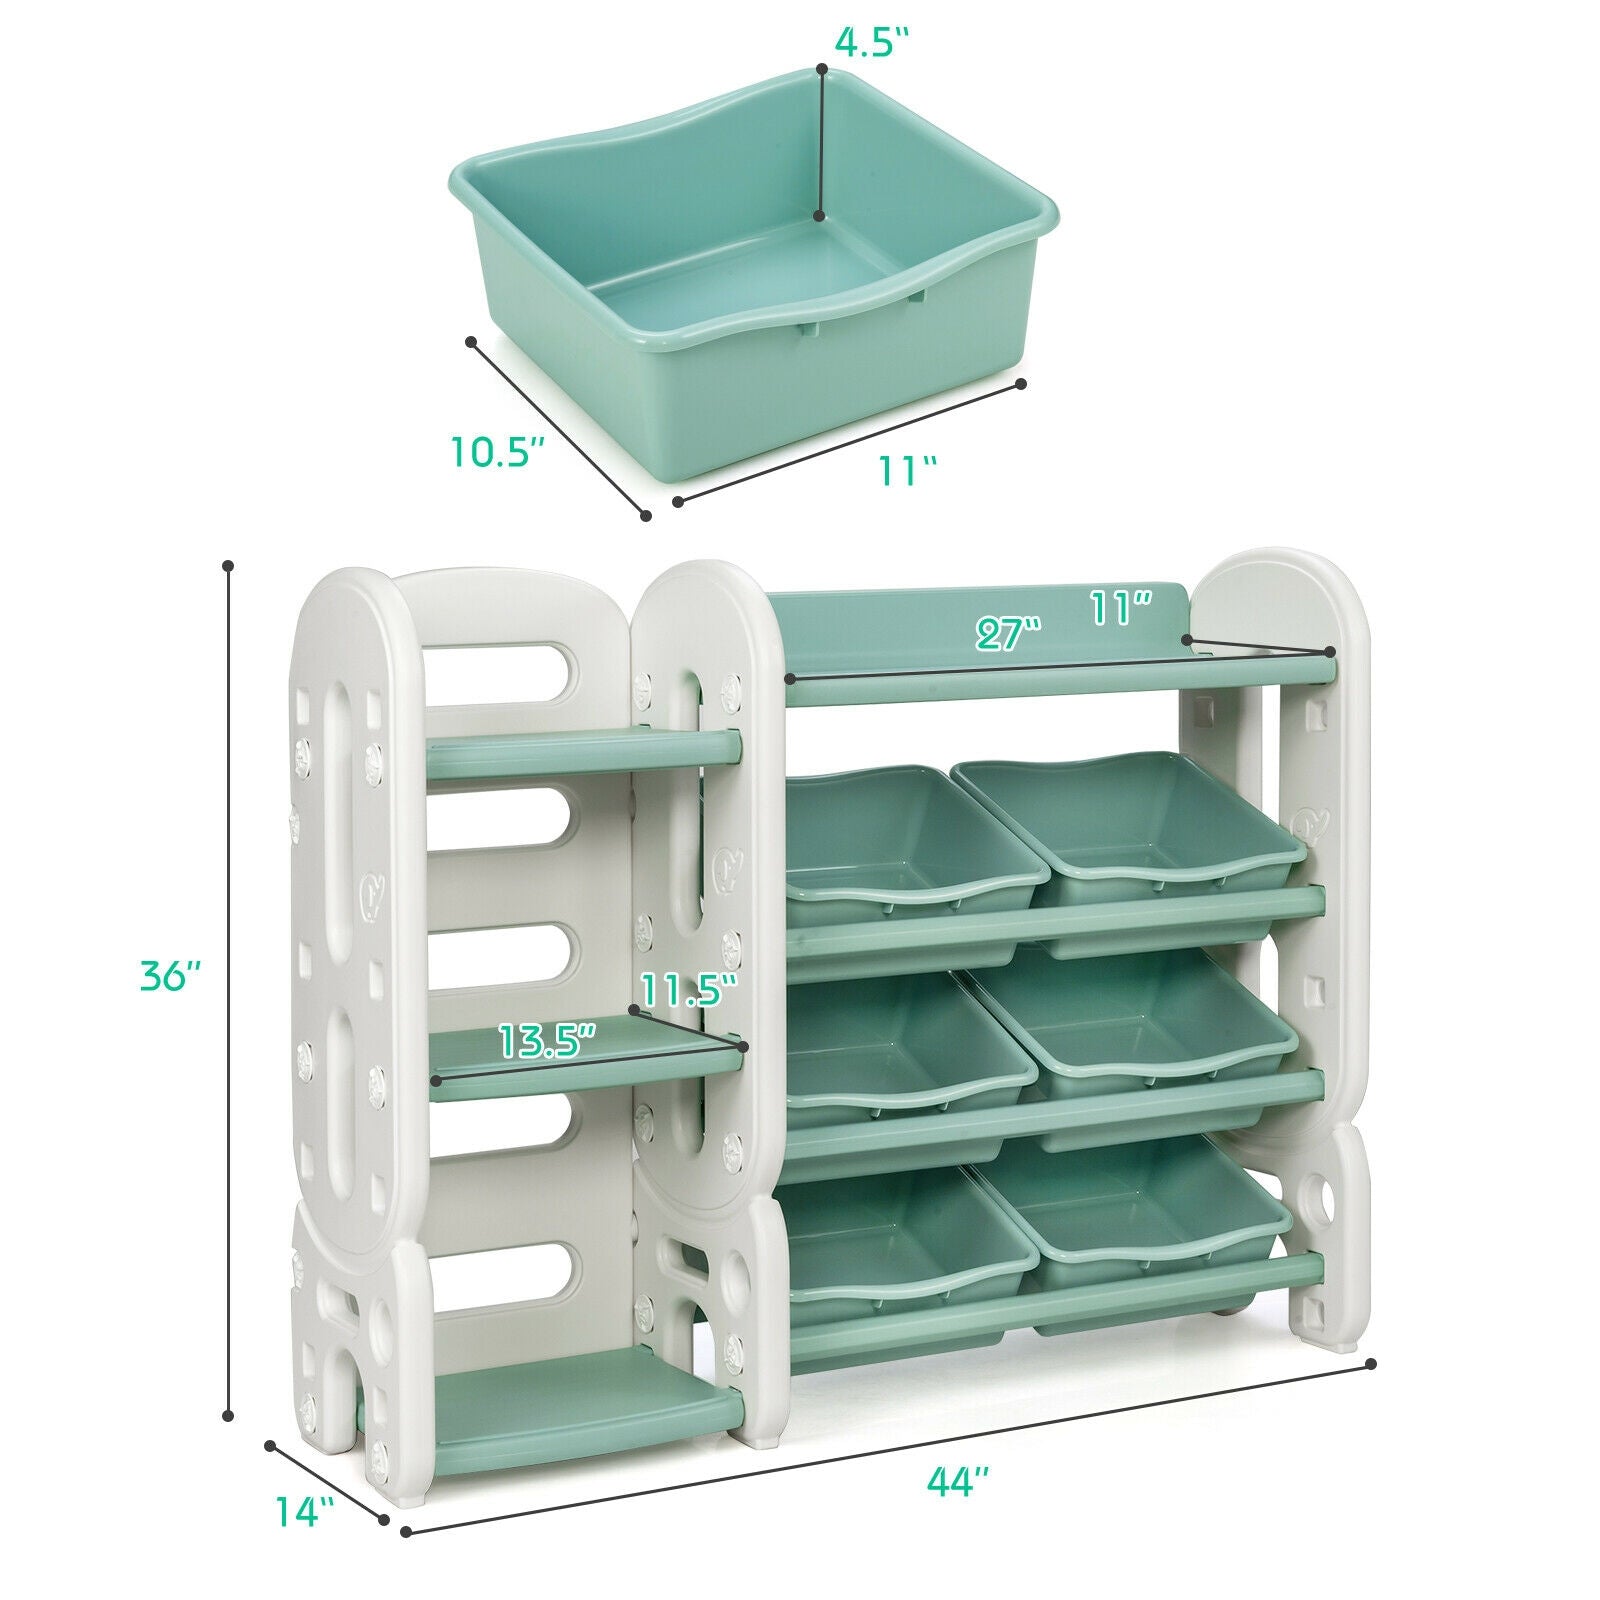 Specifications Color: Blue/Green Material: HDPE Product dimension: 44" x 14" x 36"(L x W x H) Net weight: 24 lbs Maximum weight: 44 lbs Package includes: 1 x Kids' toy storage organizer